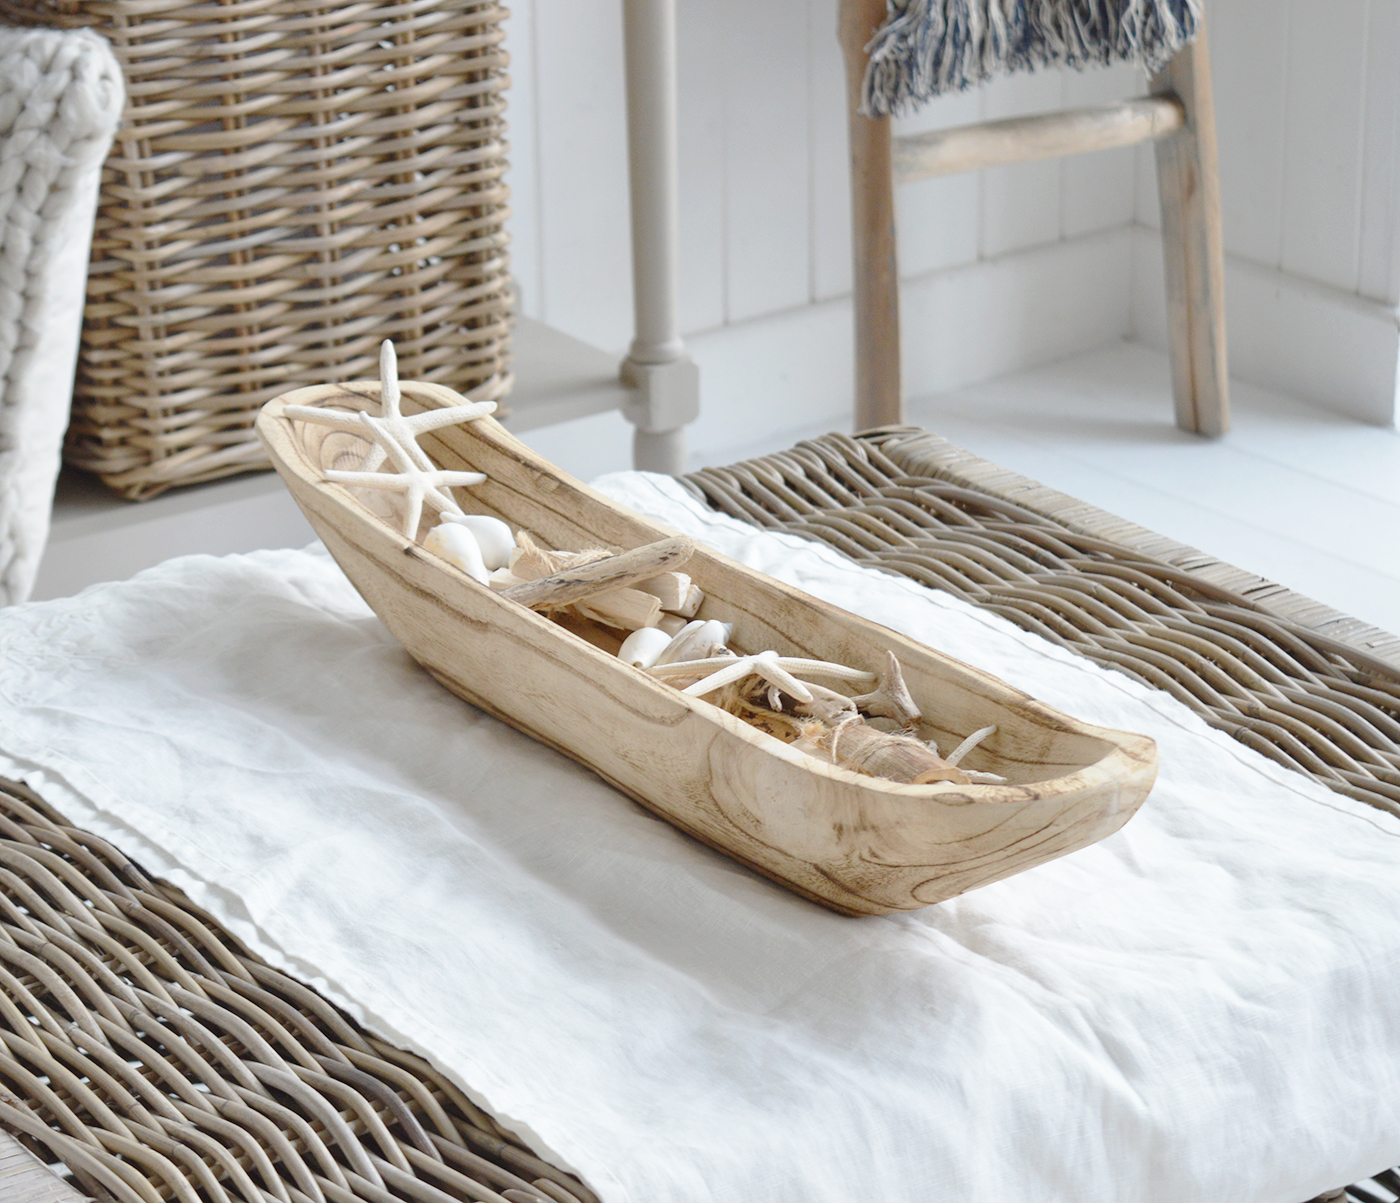 Chadwick dough bowl filled with coastal pieces for styling a Hamptons style coffee table